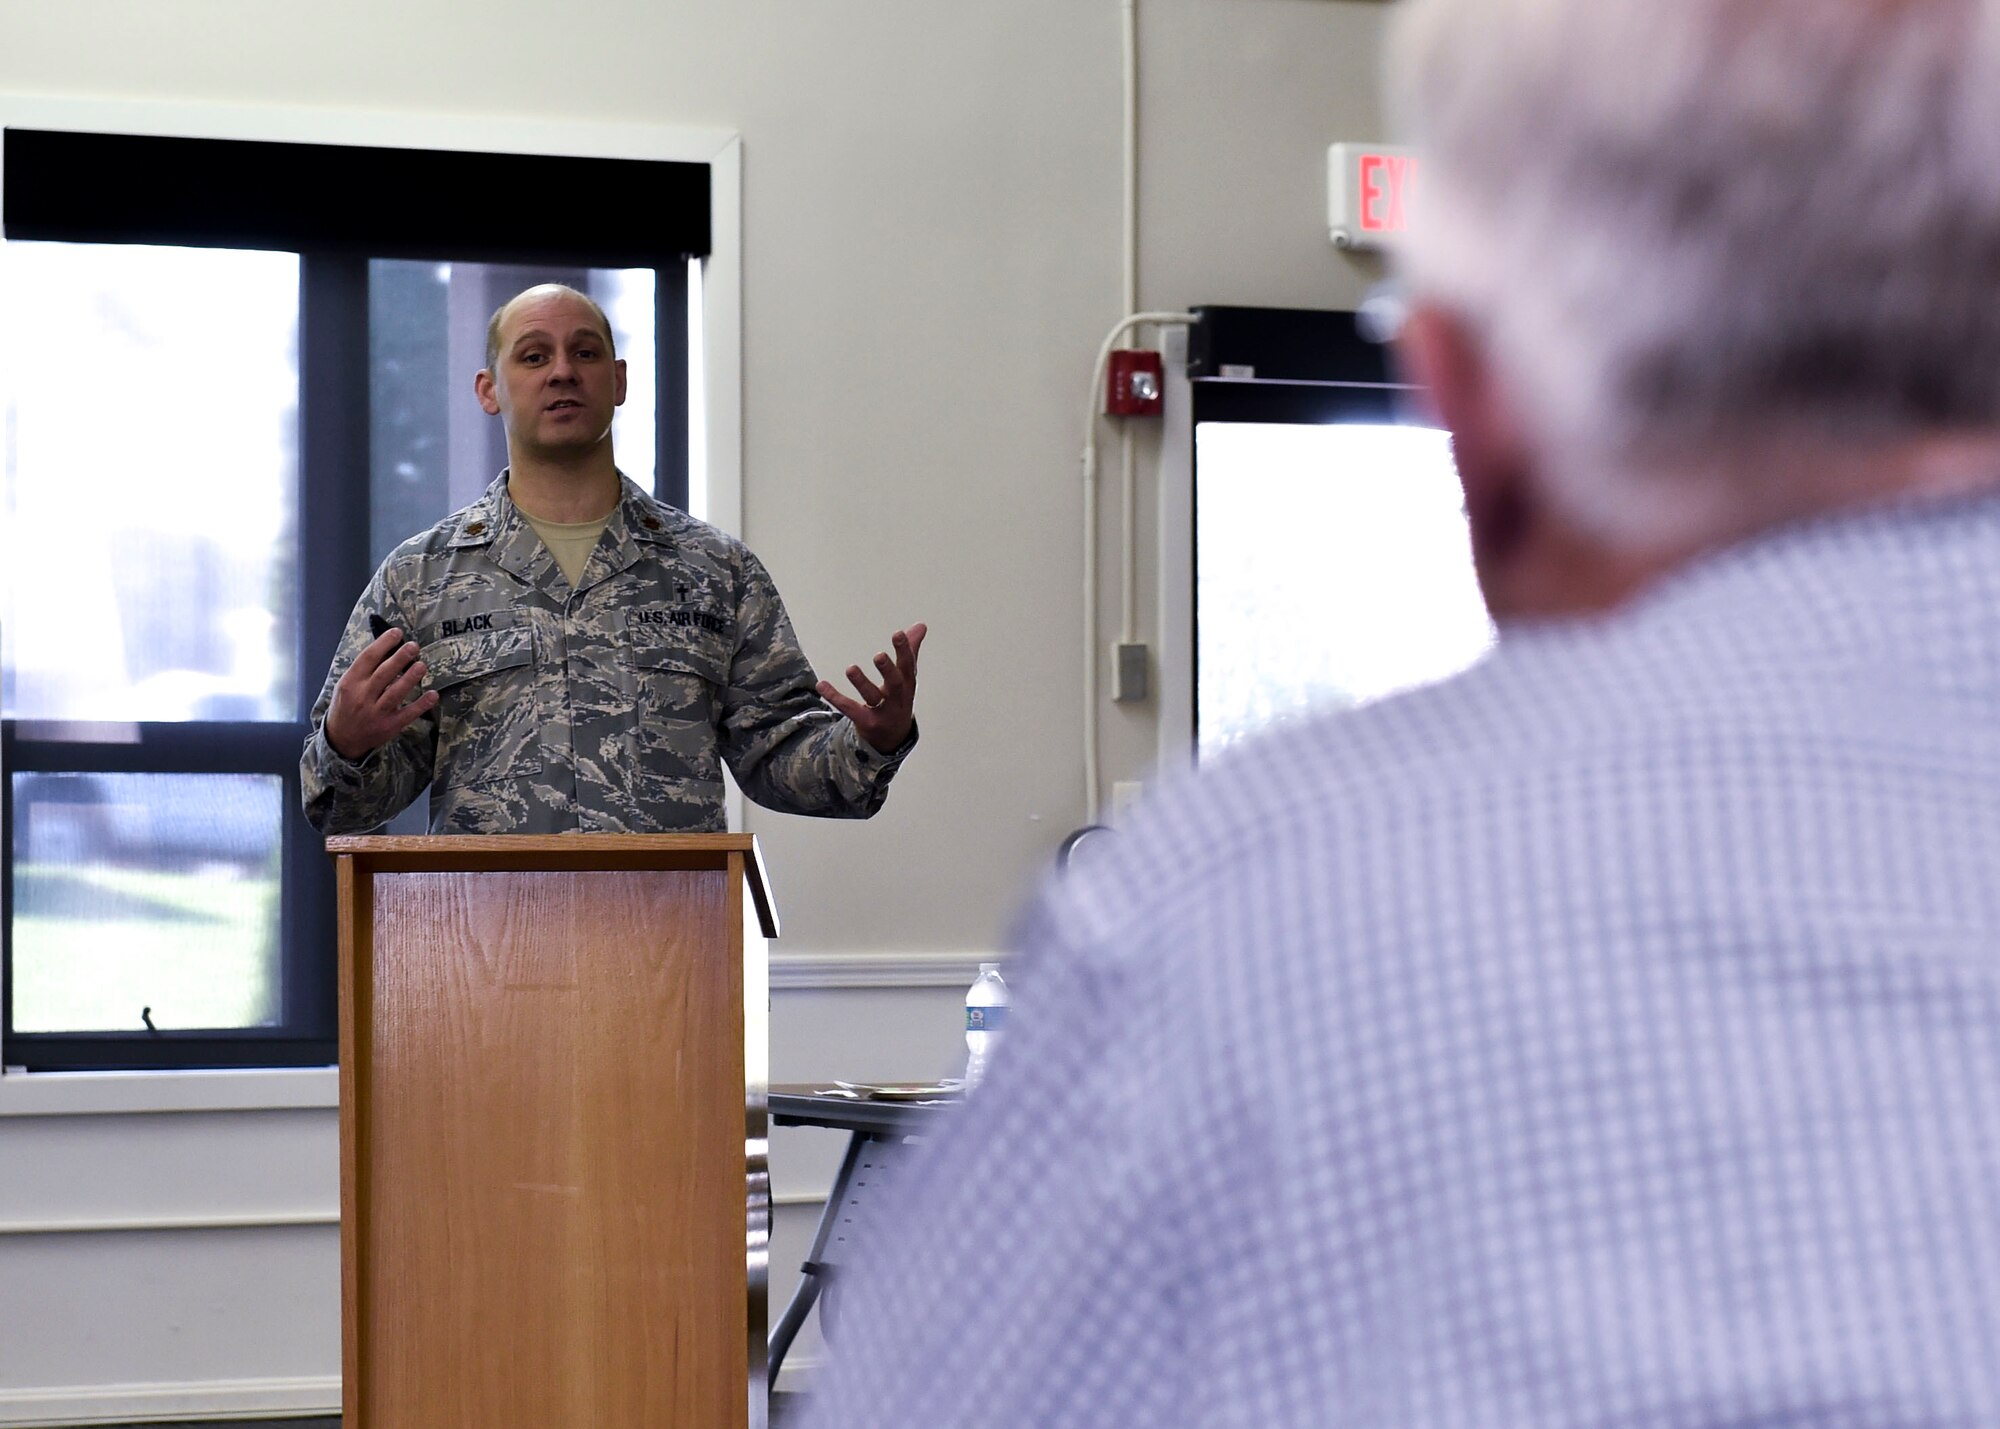 Maj. David Black, 910th Airlift Wing chaplain, briefs Daniel R. Sitterly, Acting Assistant Secretary of the Air Force (SAF) for Manpower and Reserve Affairs, on the 910th's efforts to ensure resiliency among its members, Oct. 14, 2017, here.